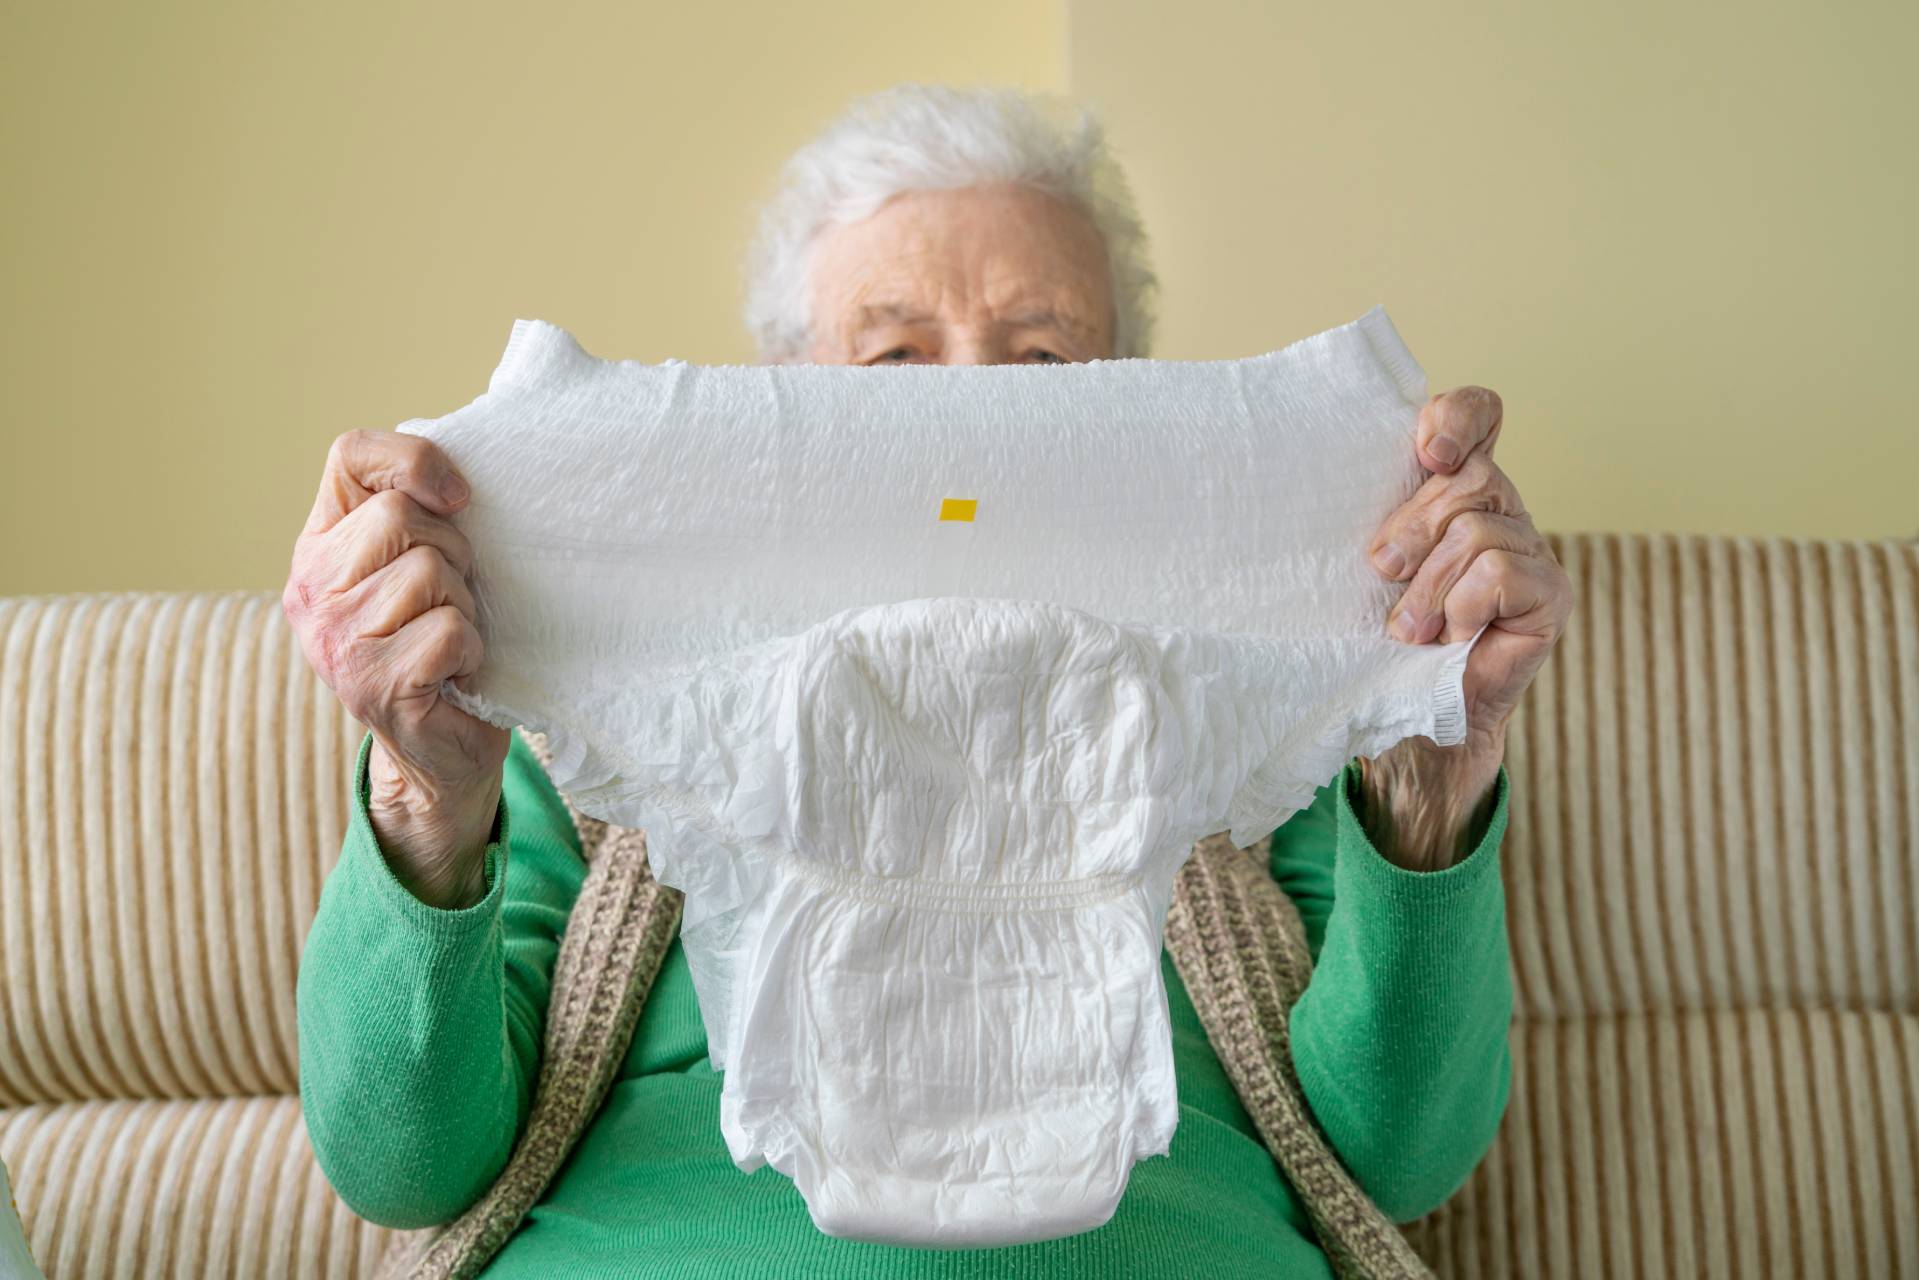 Guide to Using Adult Diapers